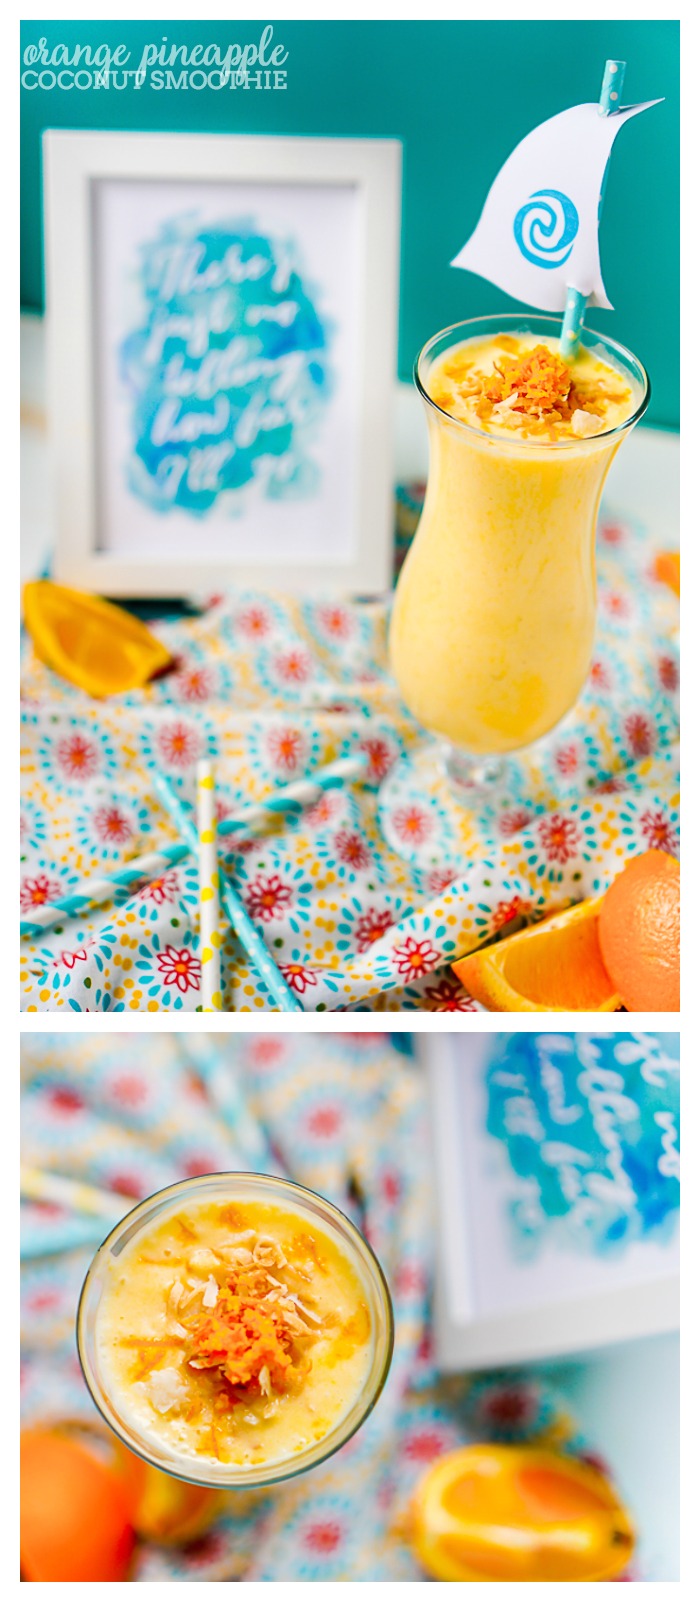 "Moana, Consider the Coconuts" Orange Pineapple Coconut Smoothie Recipe - A flavorful, citrus smoothie that will make you think sun and warmth all year long! | The Love Nerds